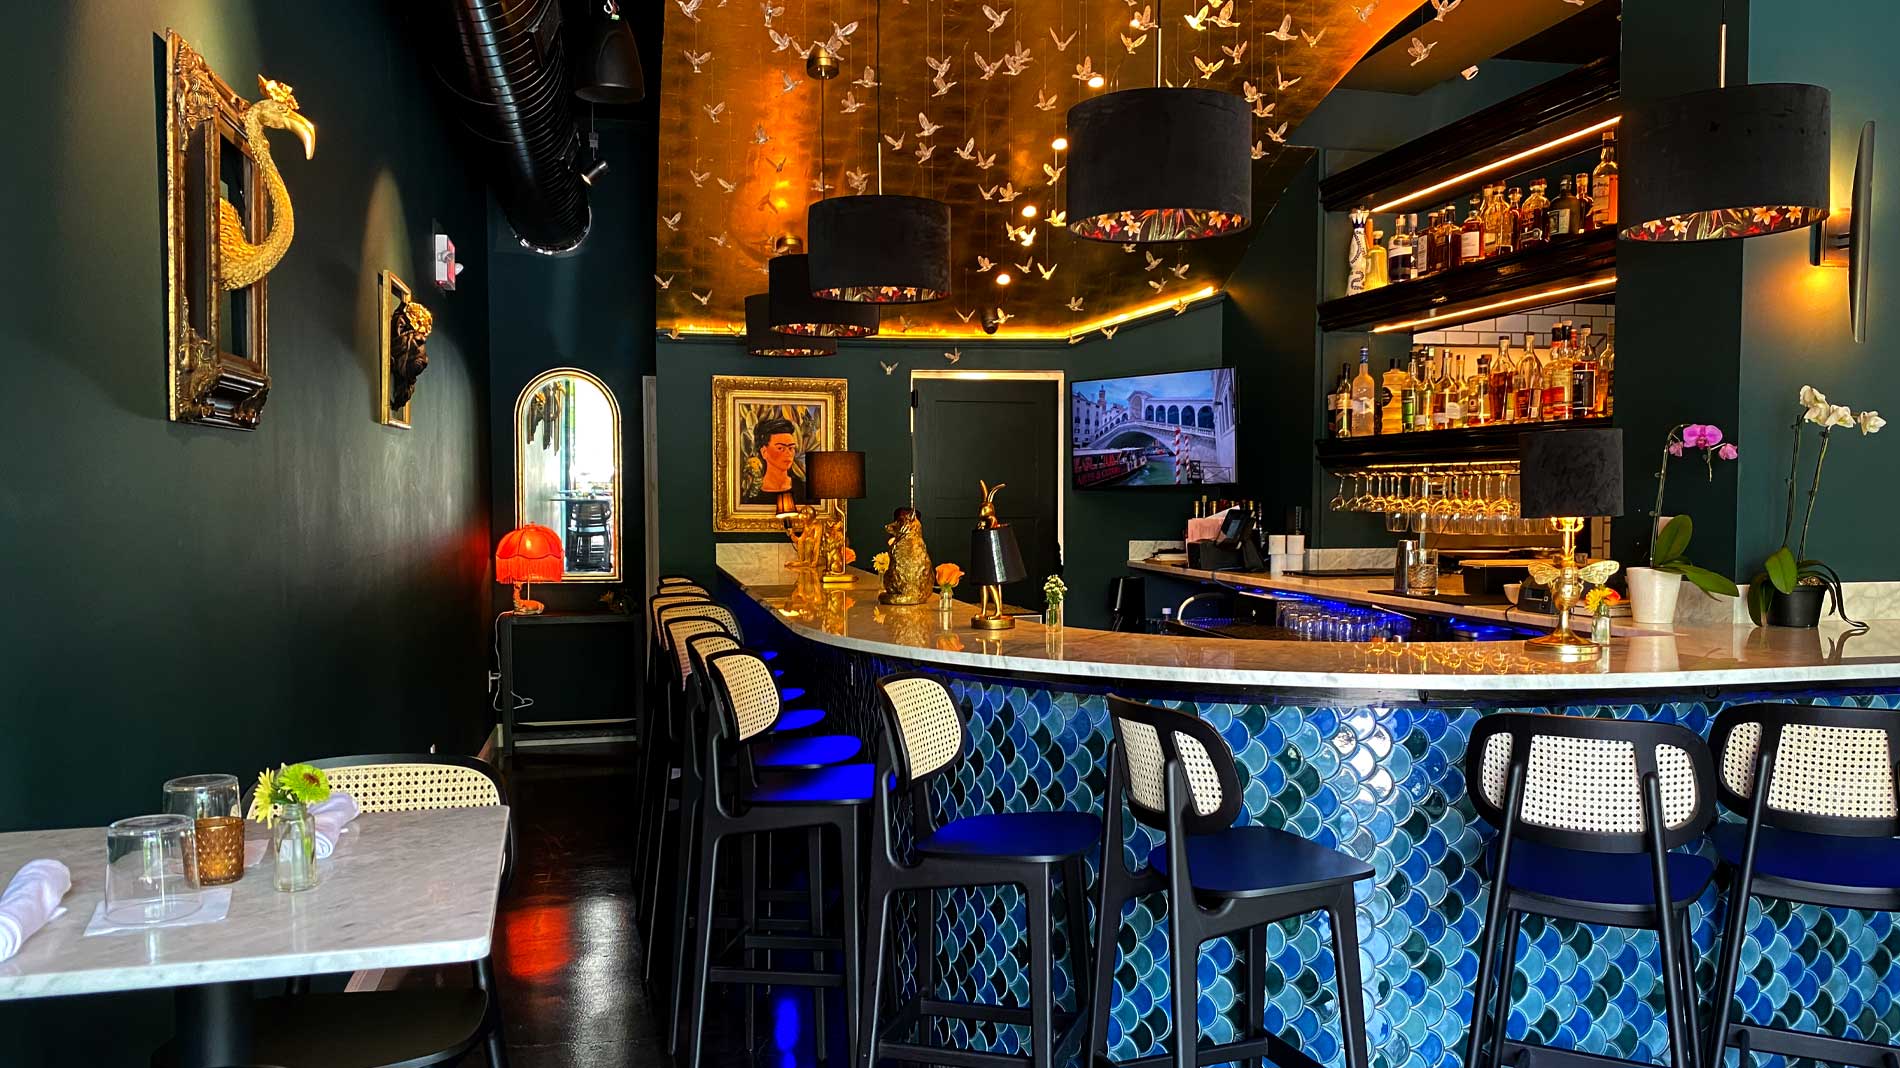 ​Bonito Bar brings new life and great drinks to Frida's in University City